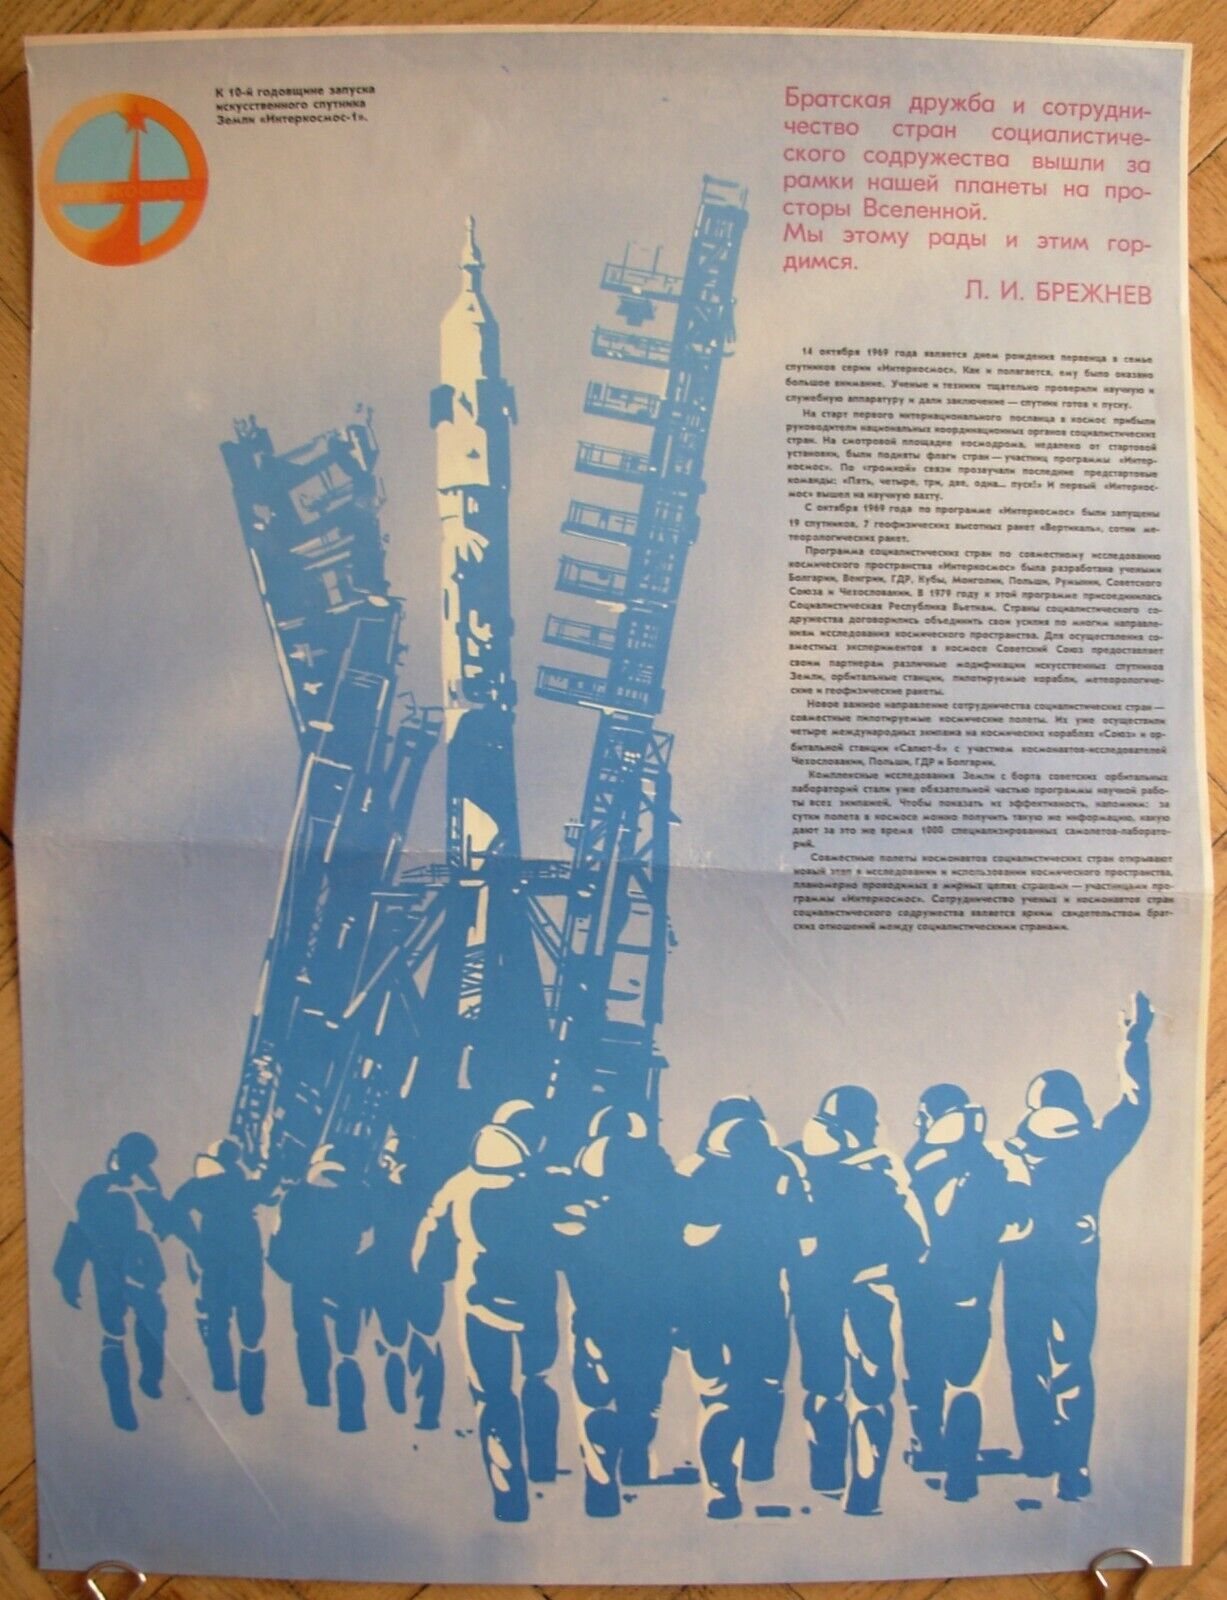 ORIGINAL SOVIET Russian POSTER Launch of Earth satellite Interkosmos USSR space